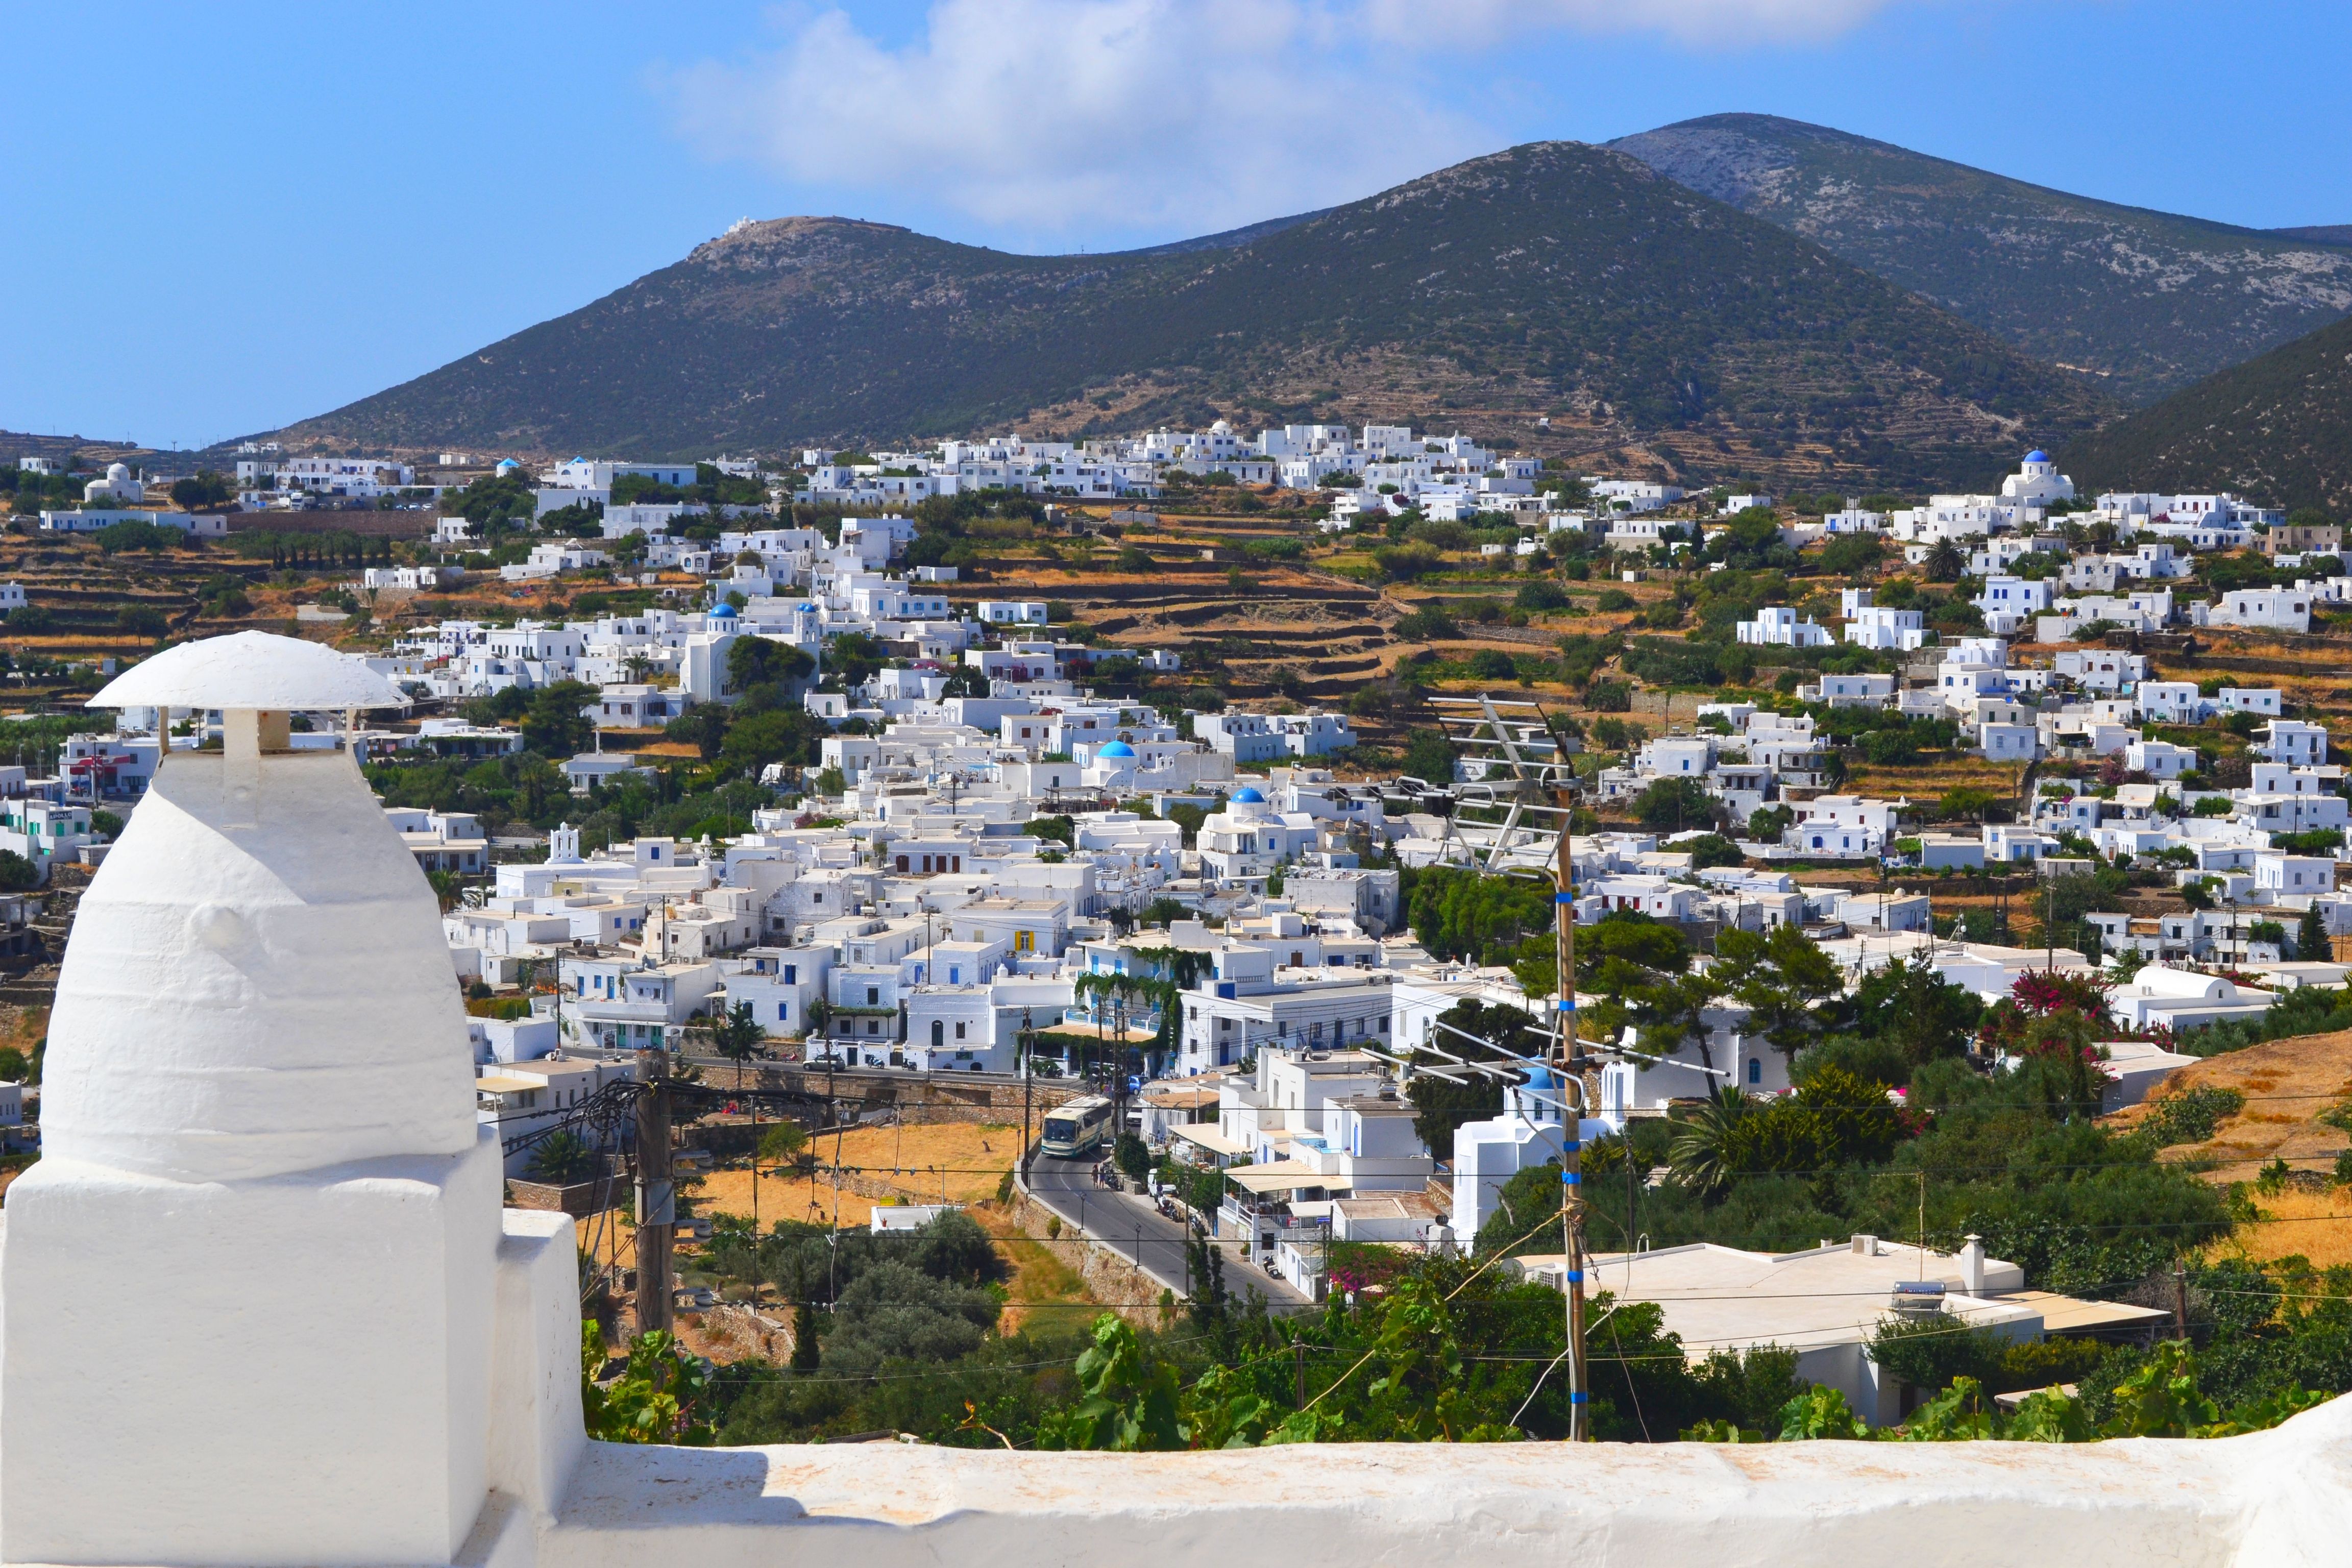 Things to do in Sifnos